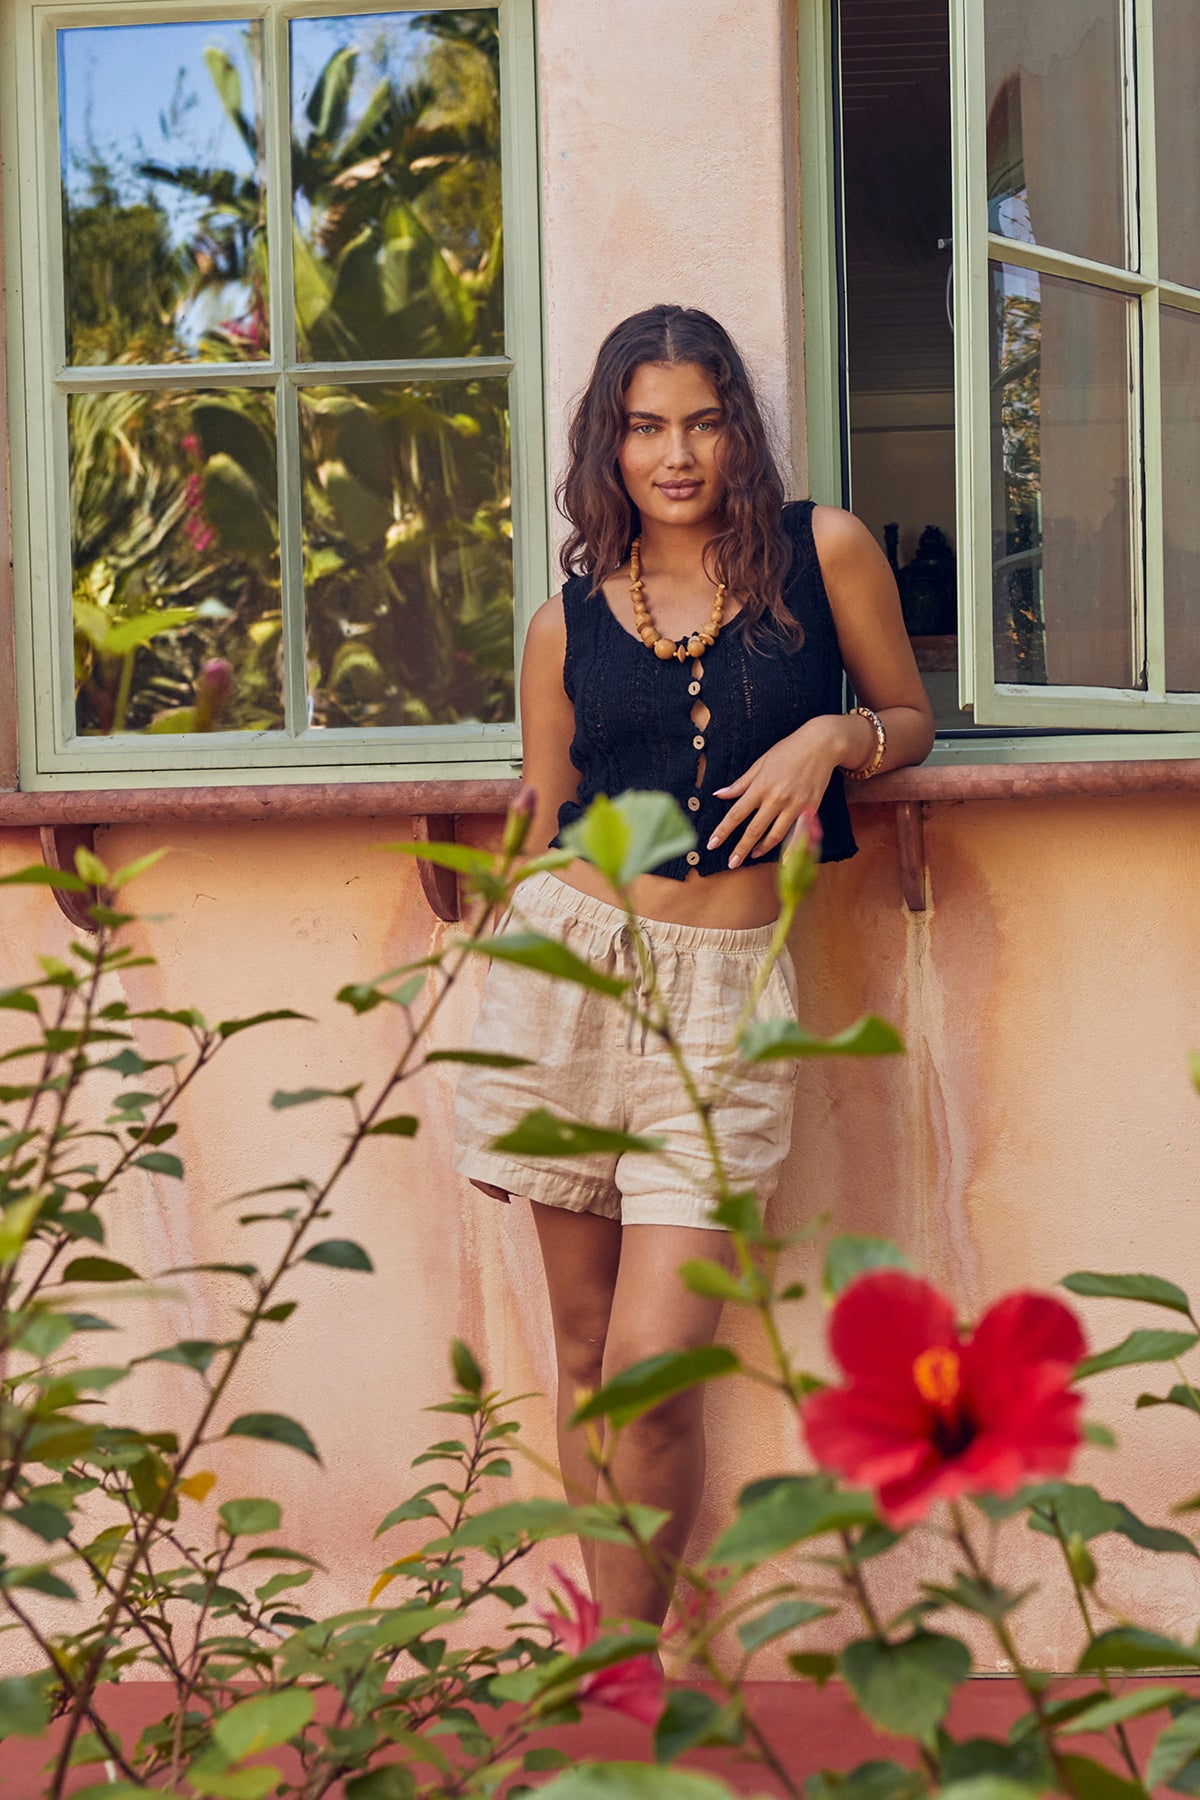   Woman standing outdoors leaning against wall of house with windows wearing Layla Crochet Stitch Tank Top in black with Tammy short in sand front with hibiscus in foreground 